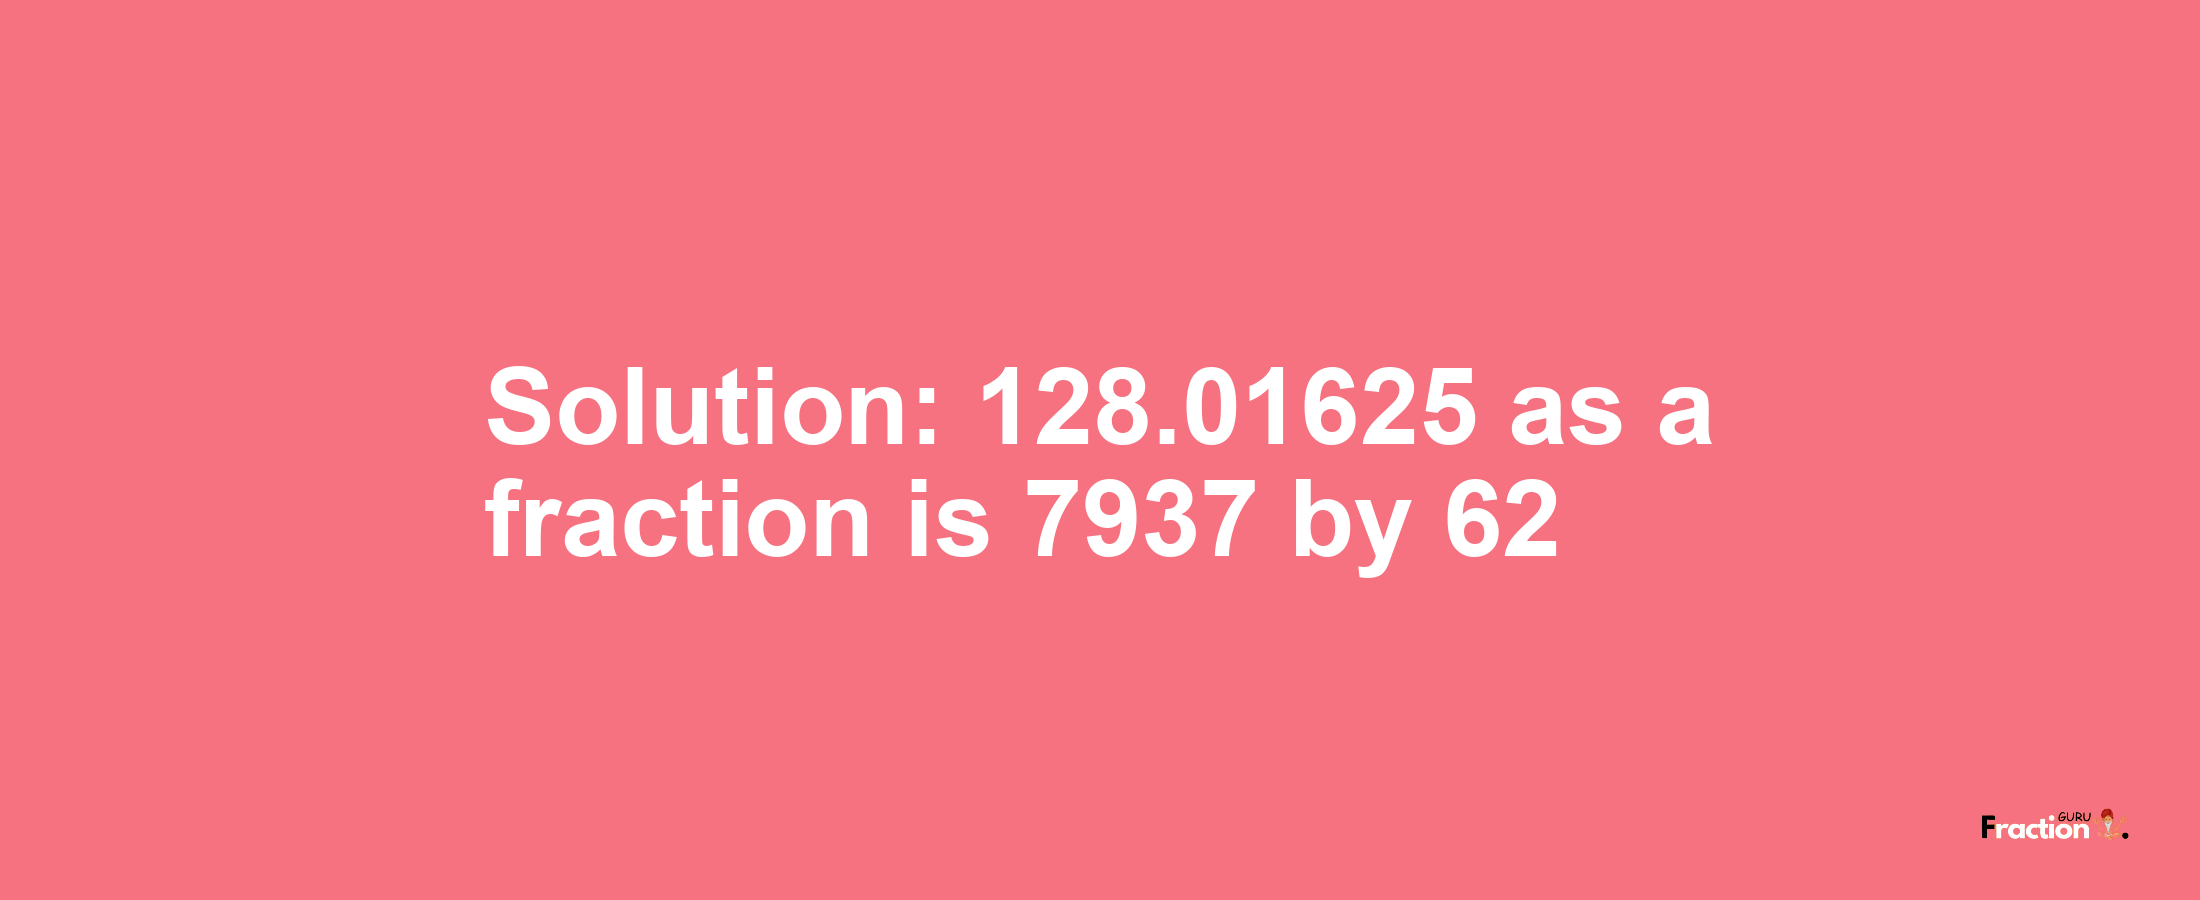 Solution:128.01625 as a fraction is 7937/62